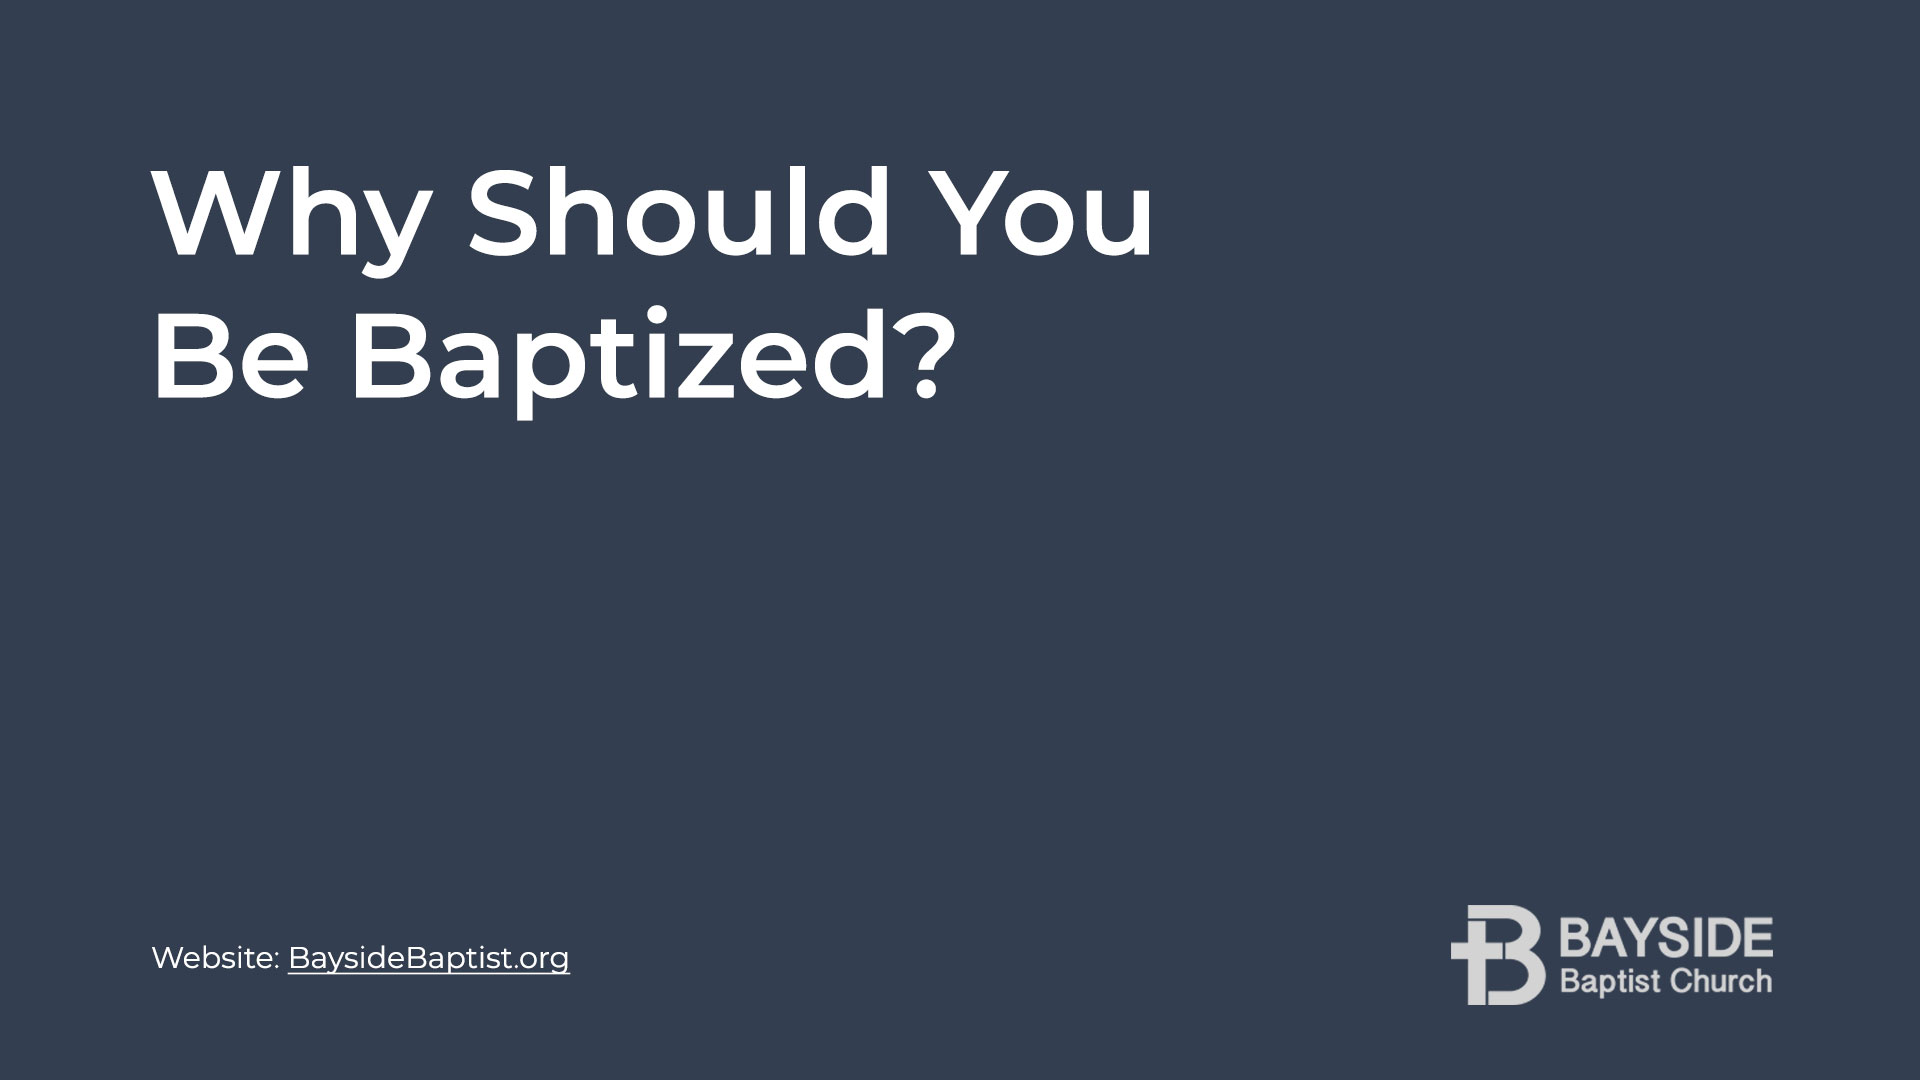 Life Journal: Why Should You Be Baptized Image